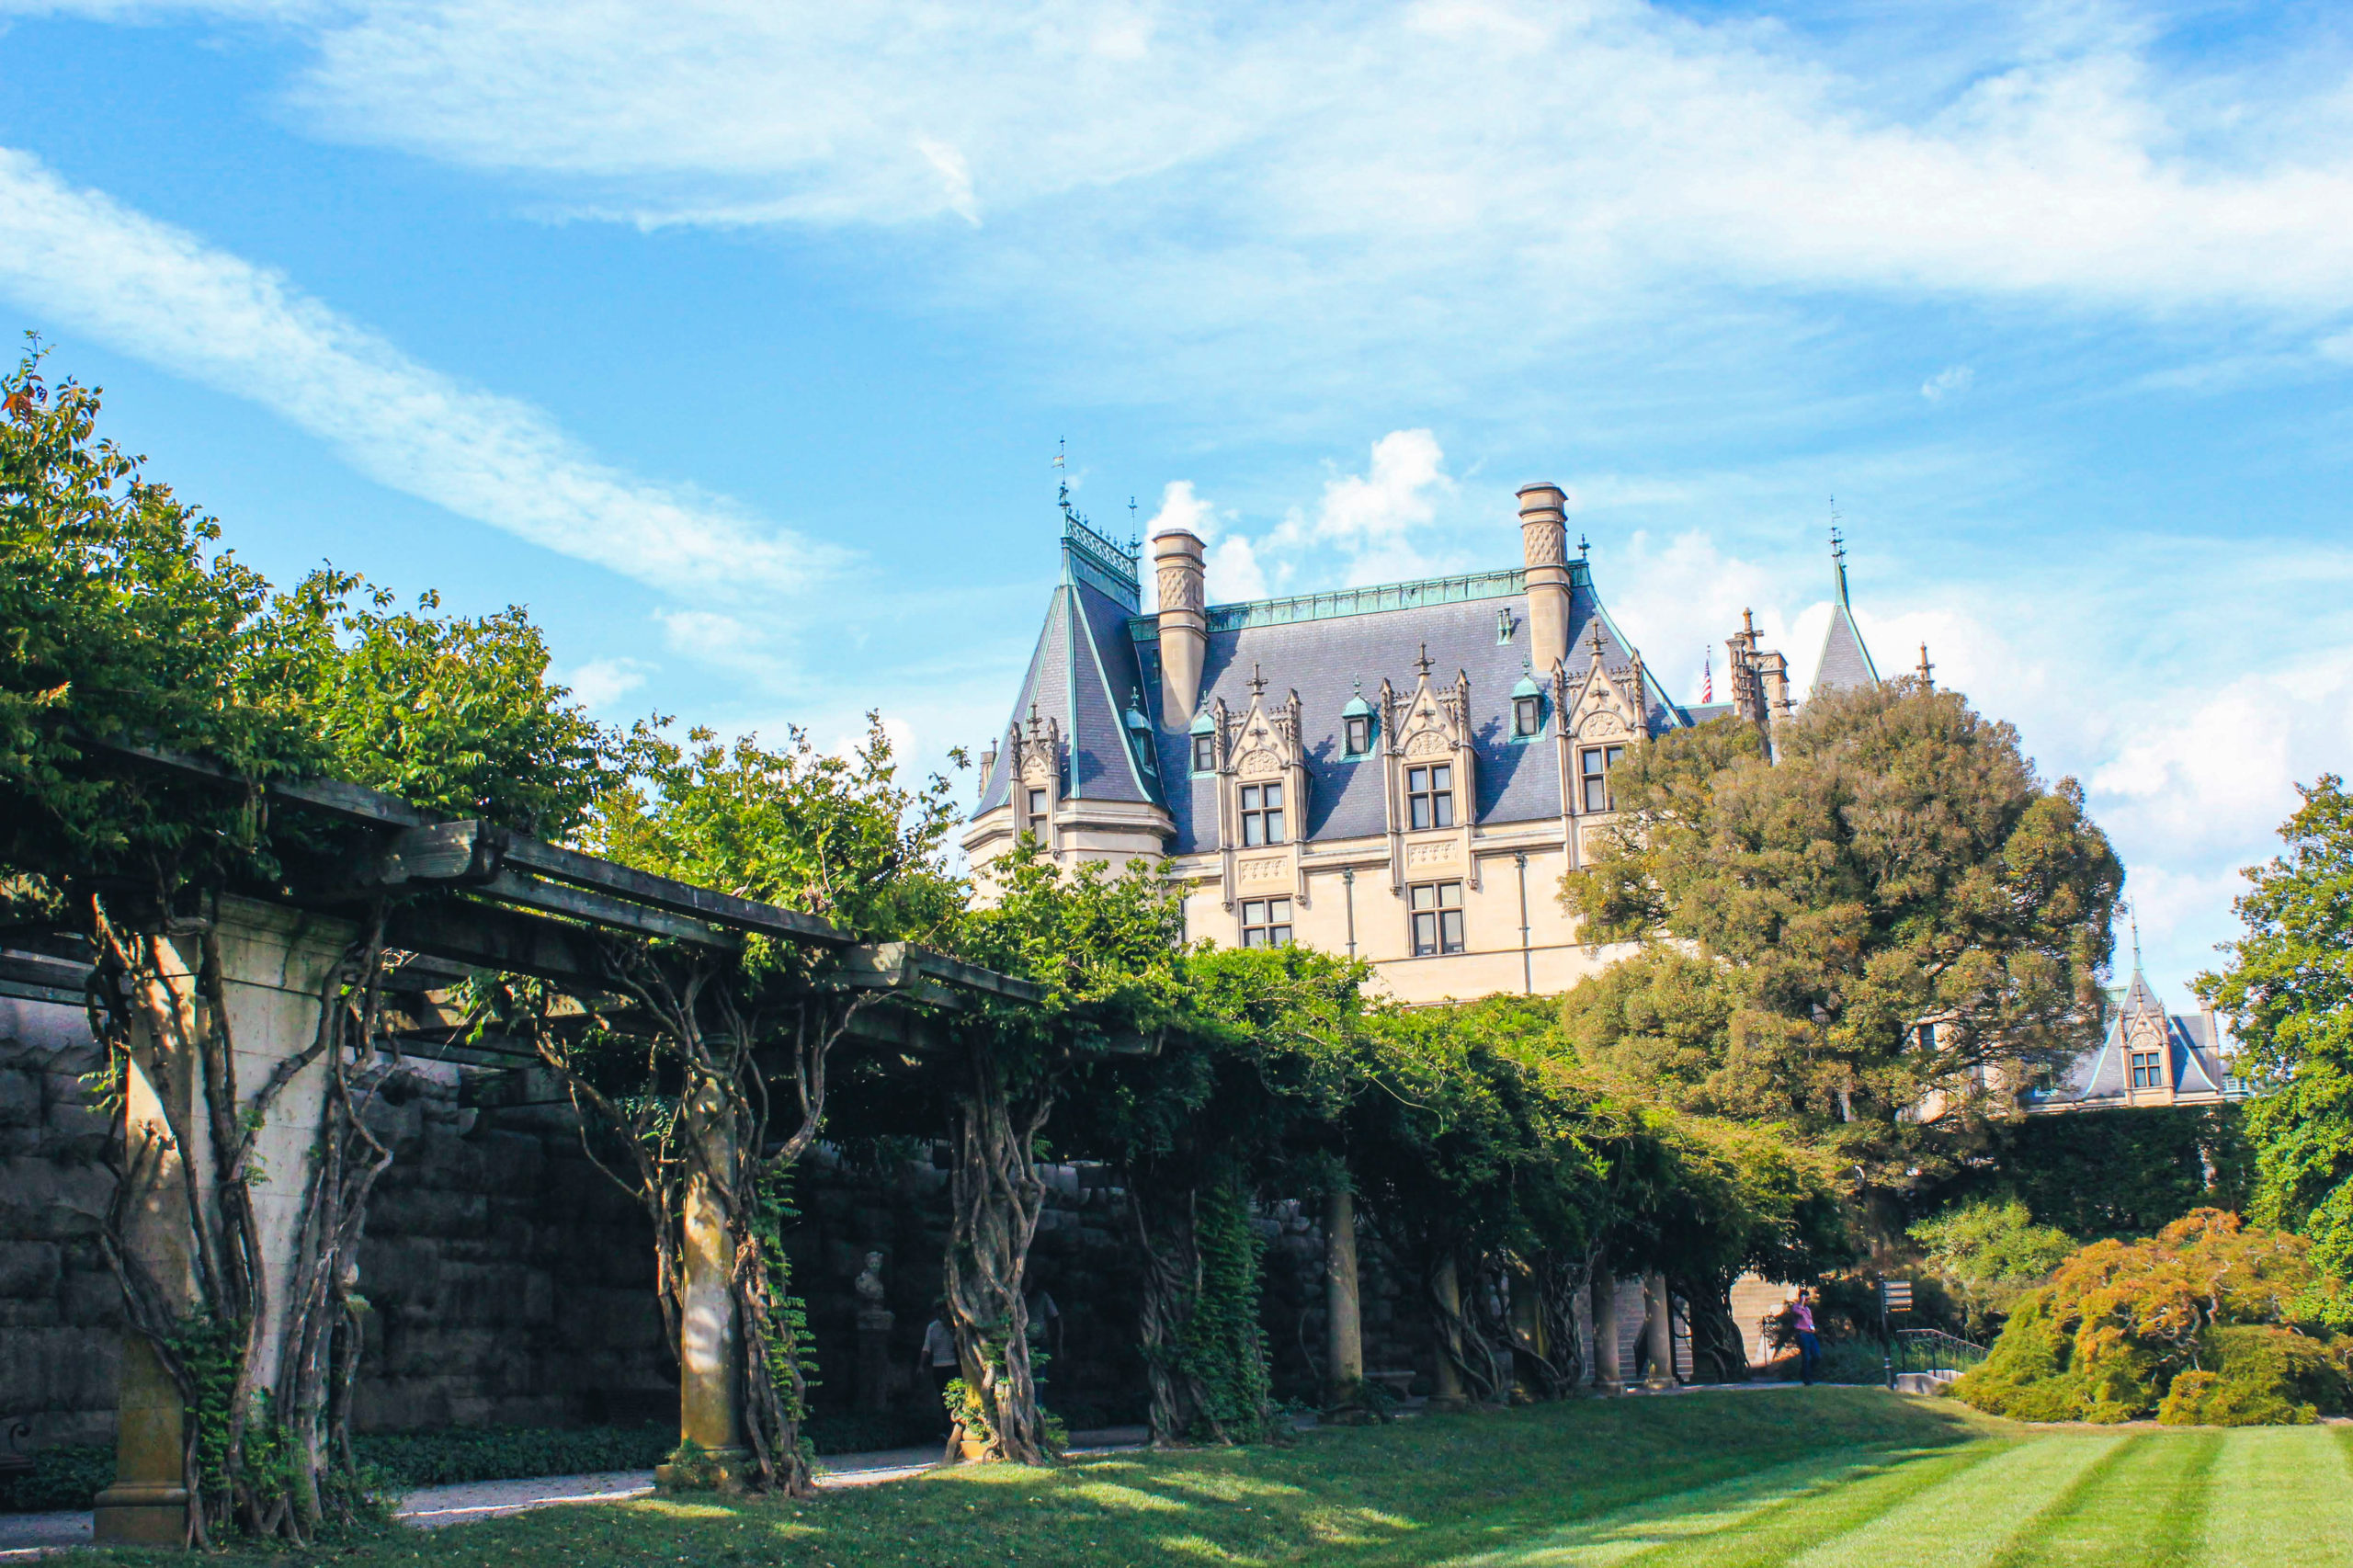 Tips for Spending a Day at the Biltmore Estate